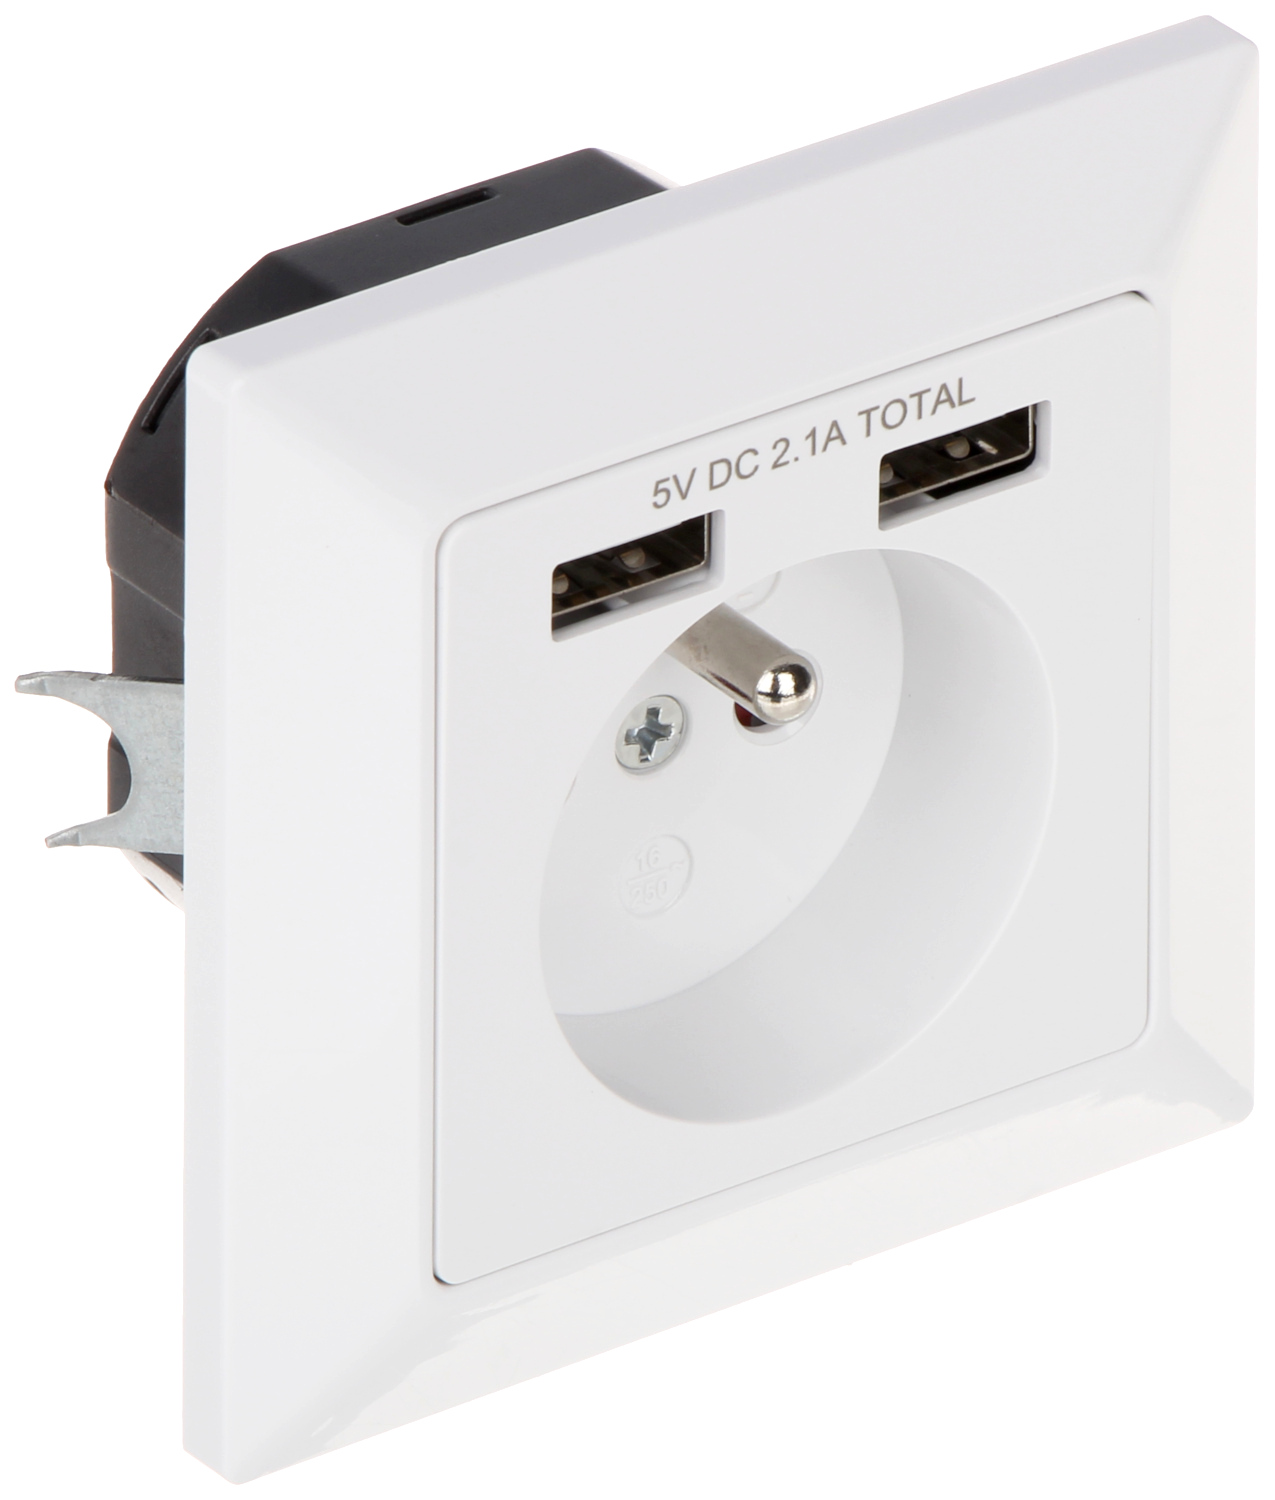 SINGLE SOCKET OUTLET WITH USB POWER ADAPTER OR-AE-1314... - 230V Socket  Outlets - Delta